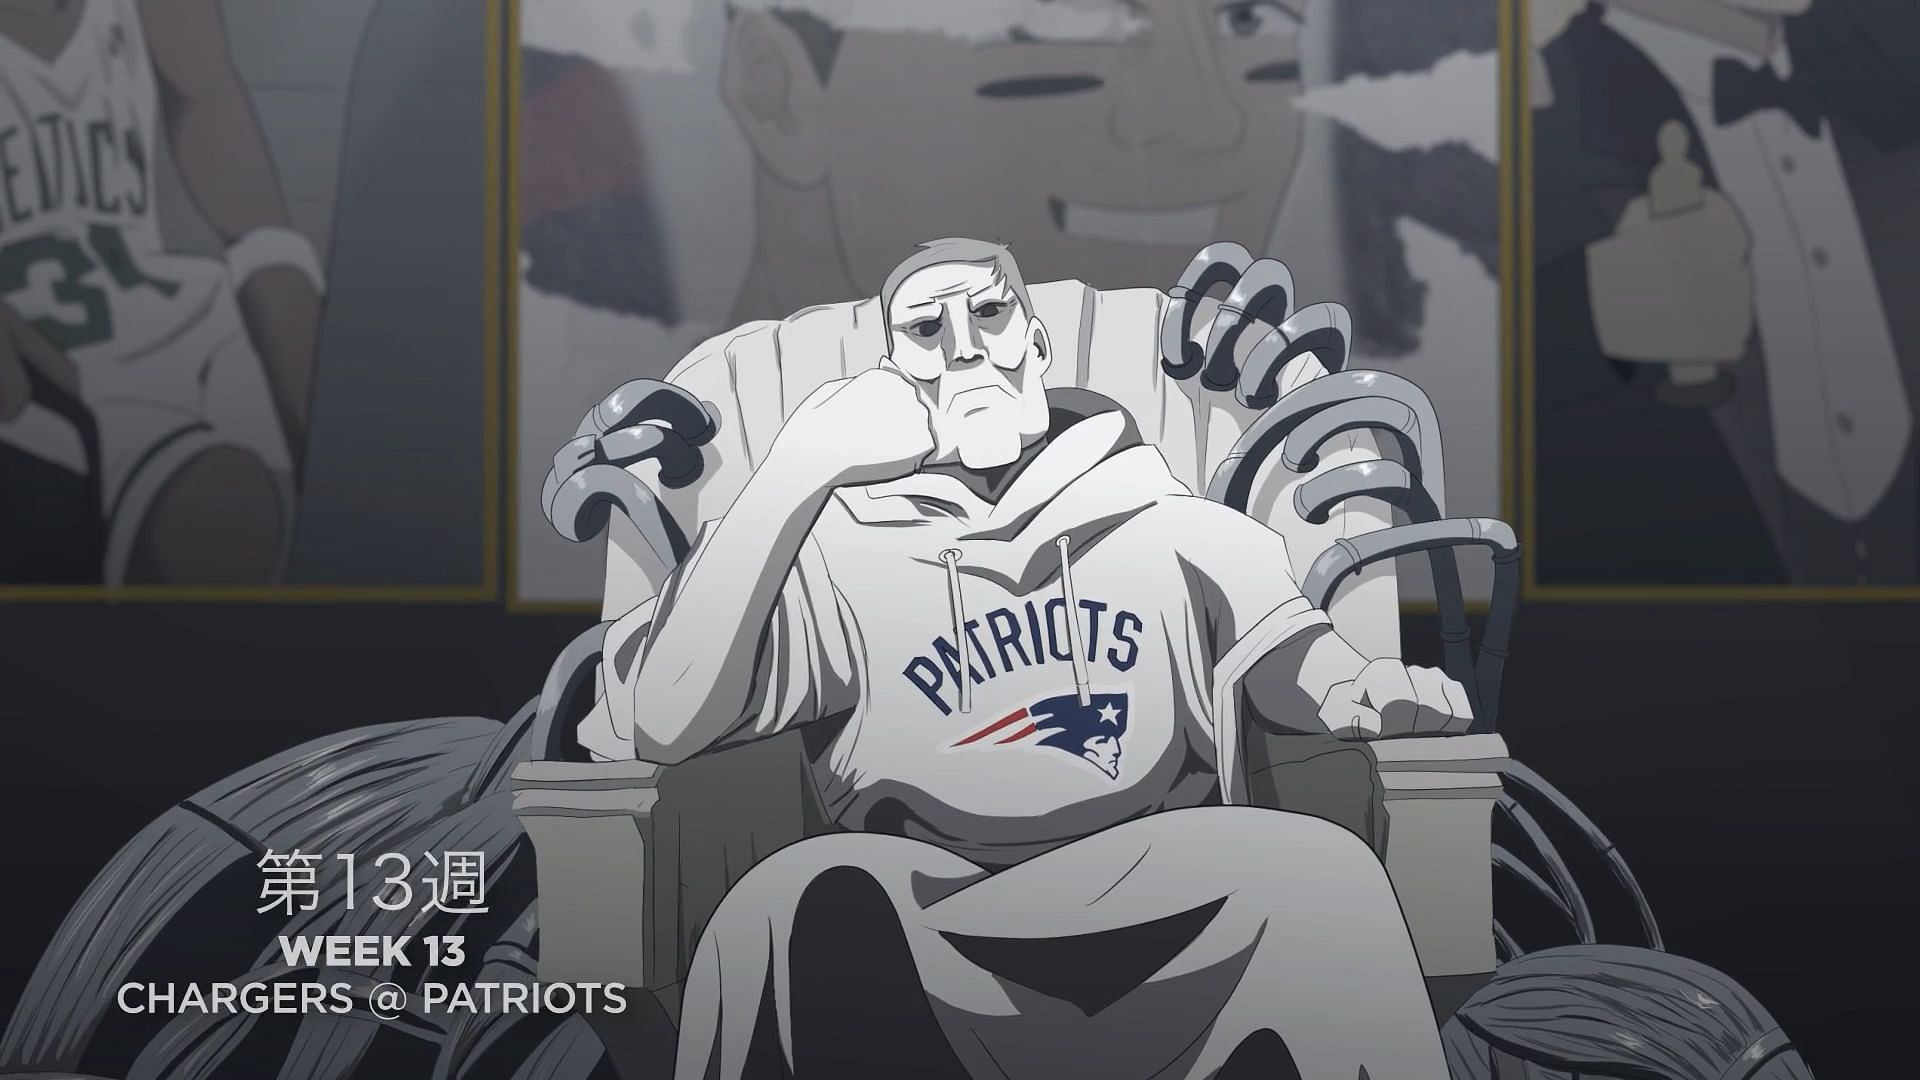 A reference to Fullmetal Alchemist: Brotherhood (Image via Los Angeles Chargers)